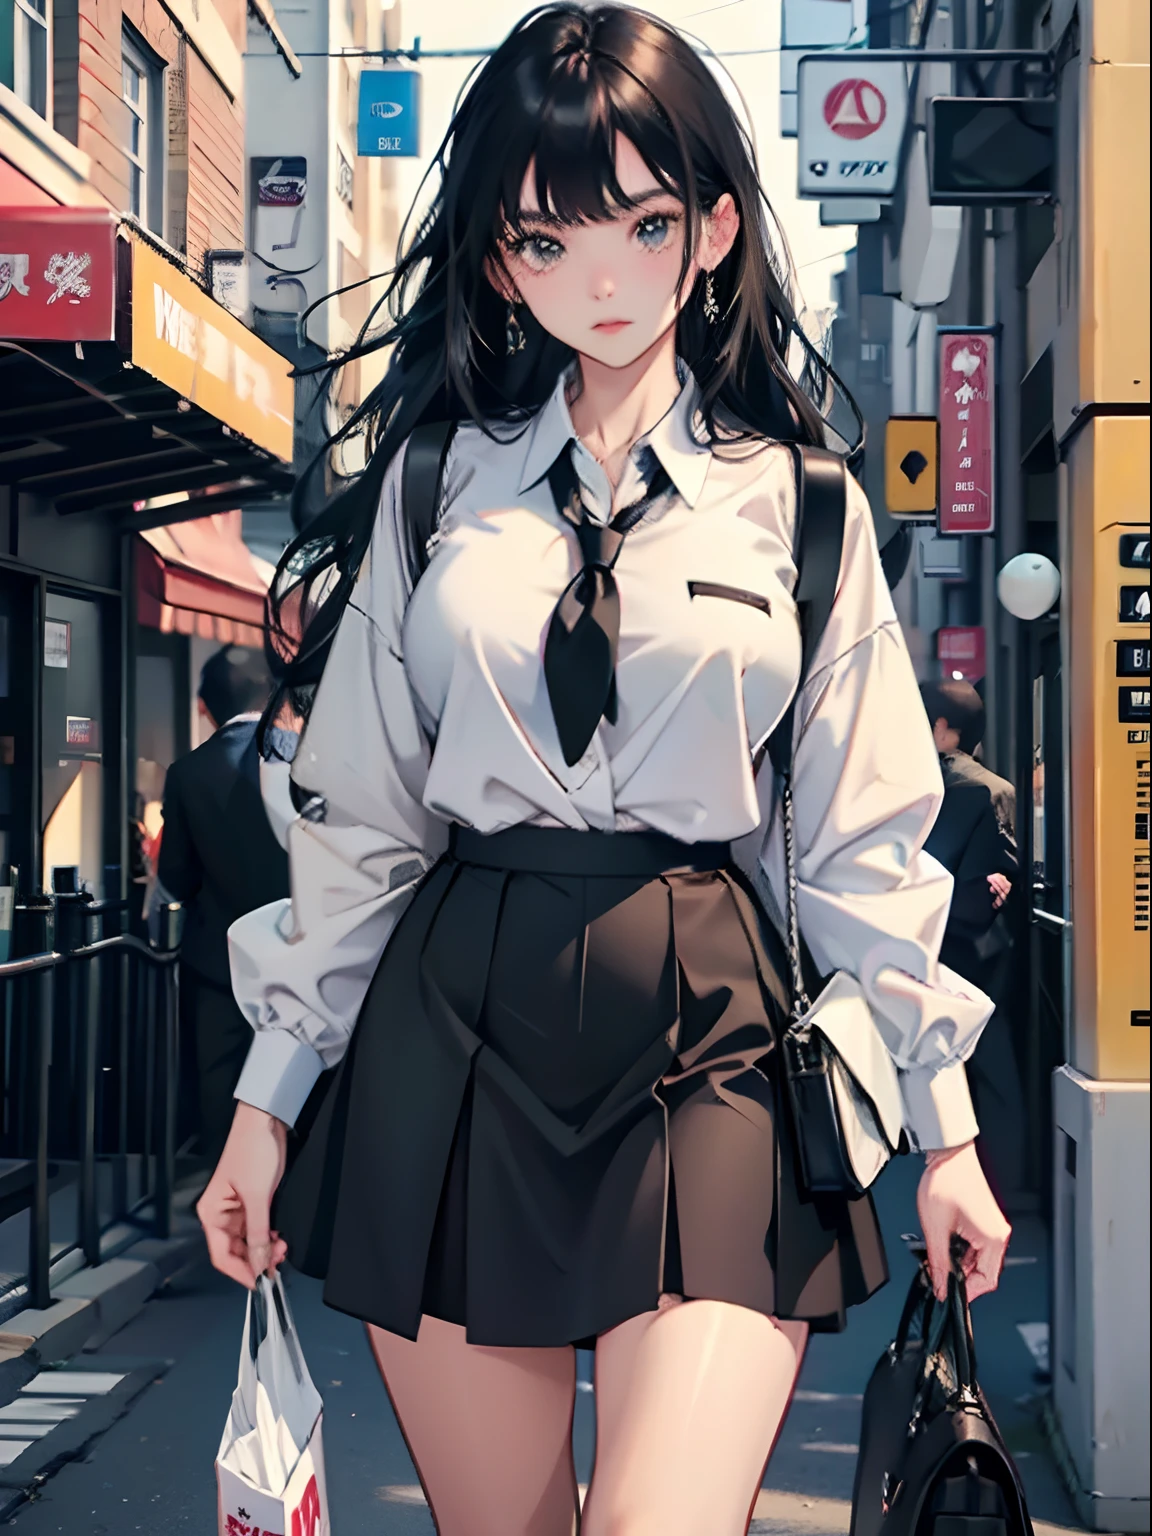 18 year old young girl : 1.3, kawaii, long black hair: 1.2, medeium breasts, Casual wear: 1.2, Daytime: 1.2,In the school campus: 1.2,Wearing school uniform:1.2, Film lighting, Surrealism, UHD, ccurate, Super detail, textured skin, High detail, Best quality, 8k,